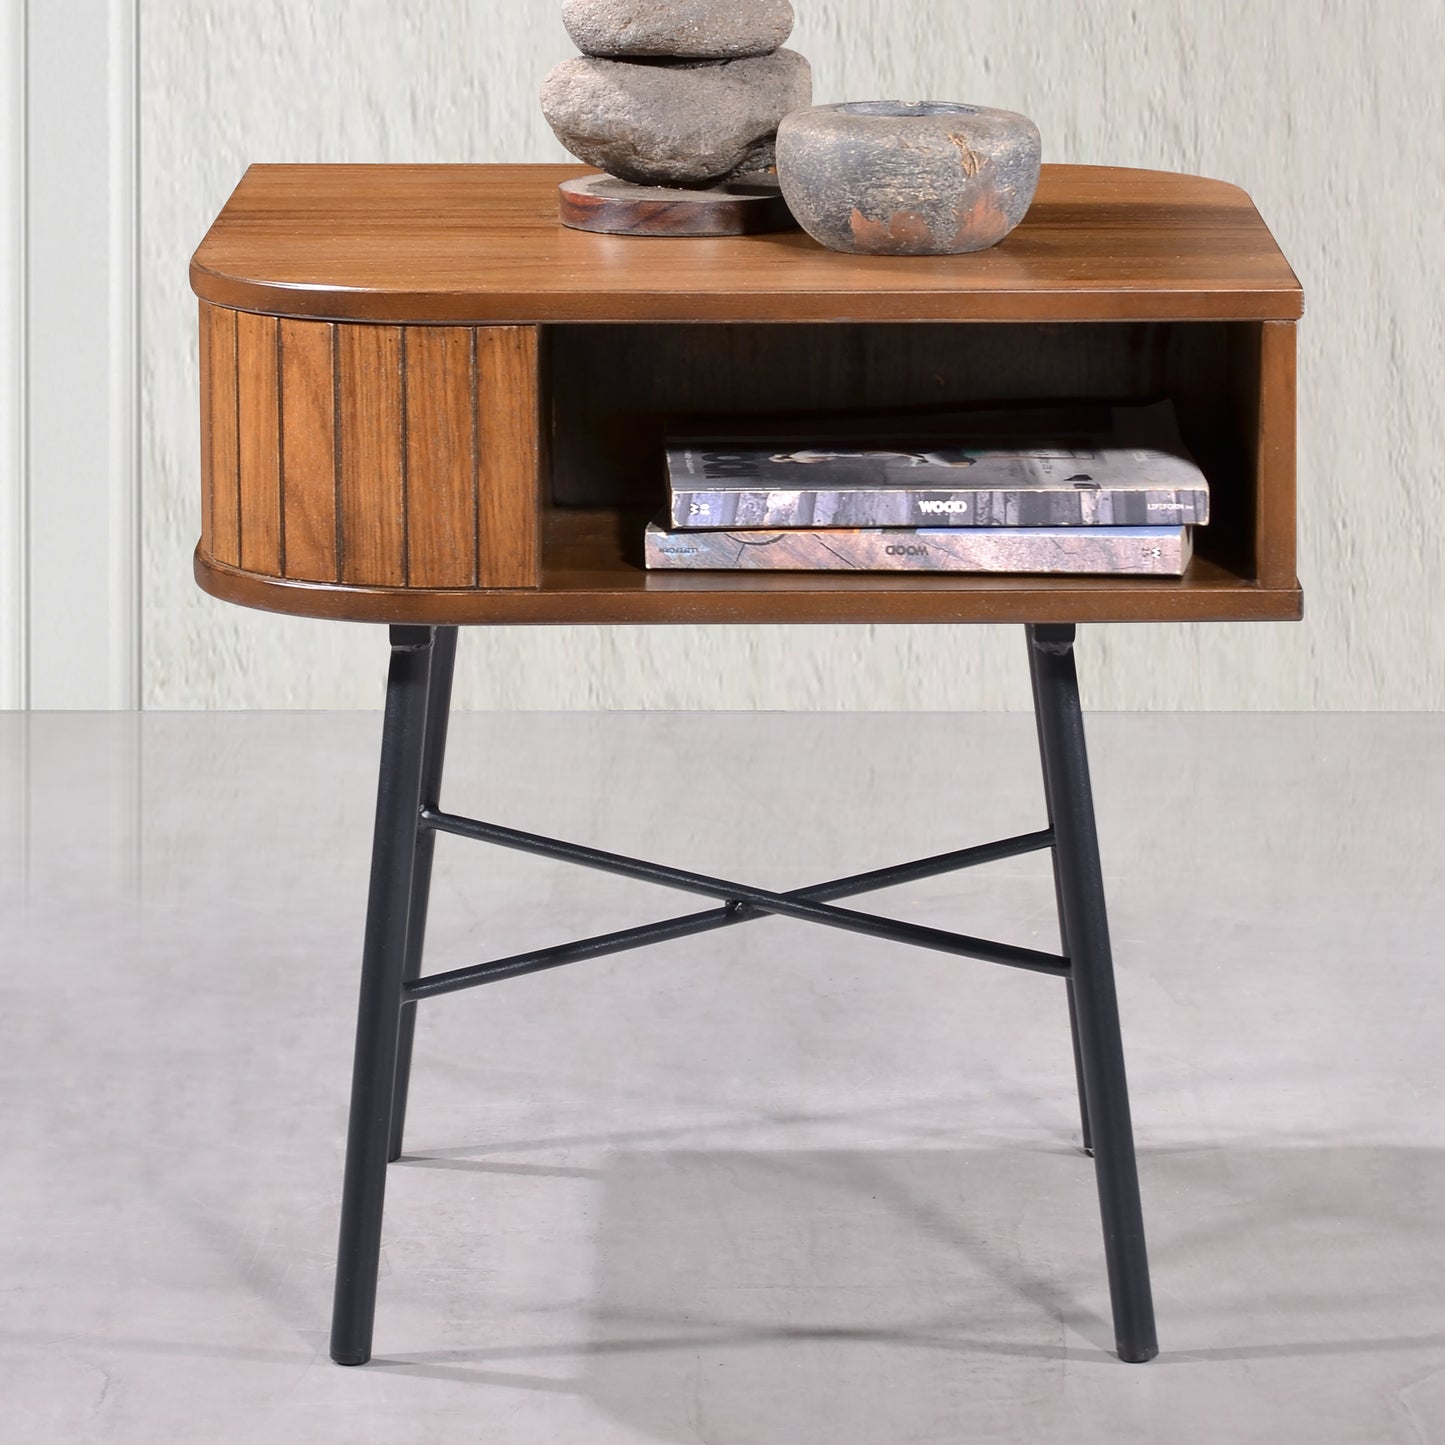 Criterion Albany End Table 500mm Semi-Assembled, Powder Coated Steel Legs Dark Ash